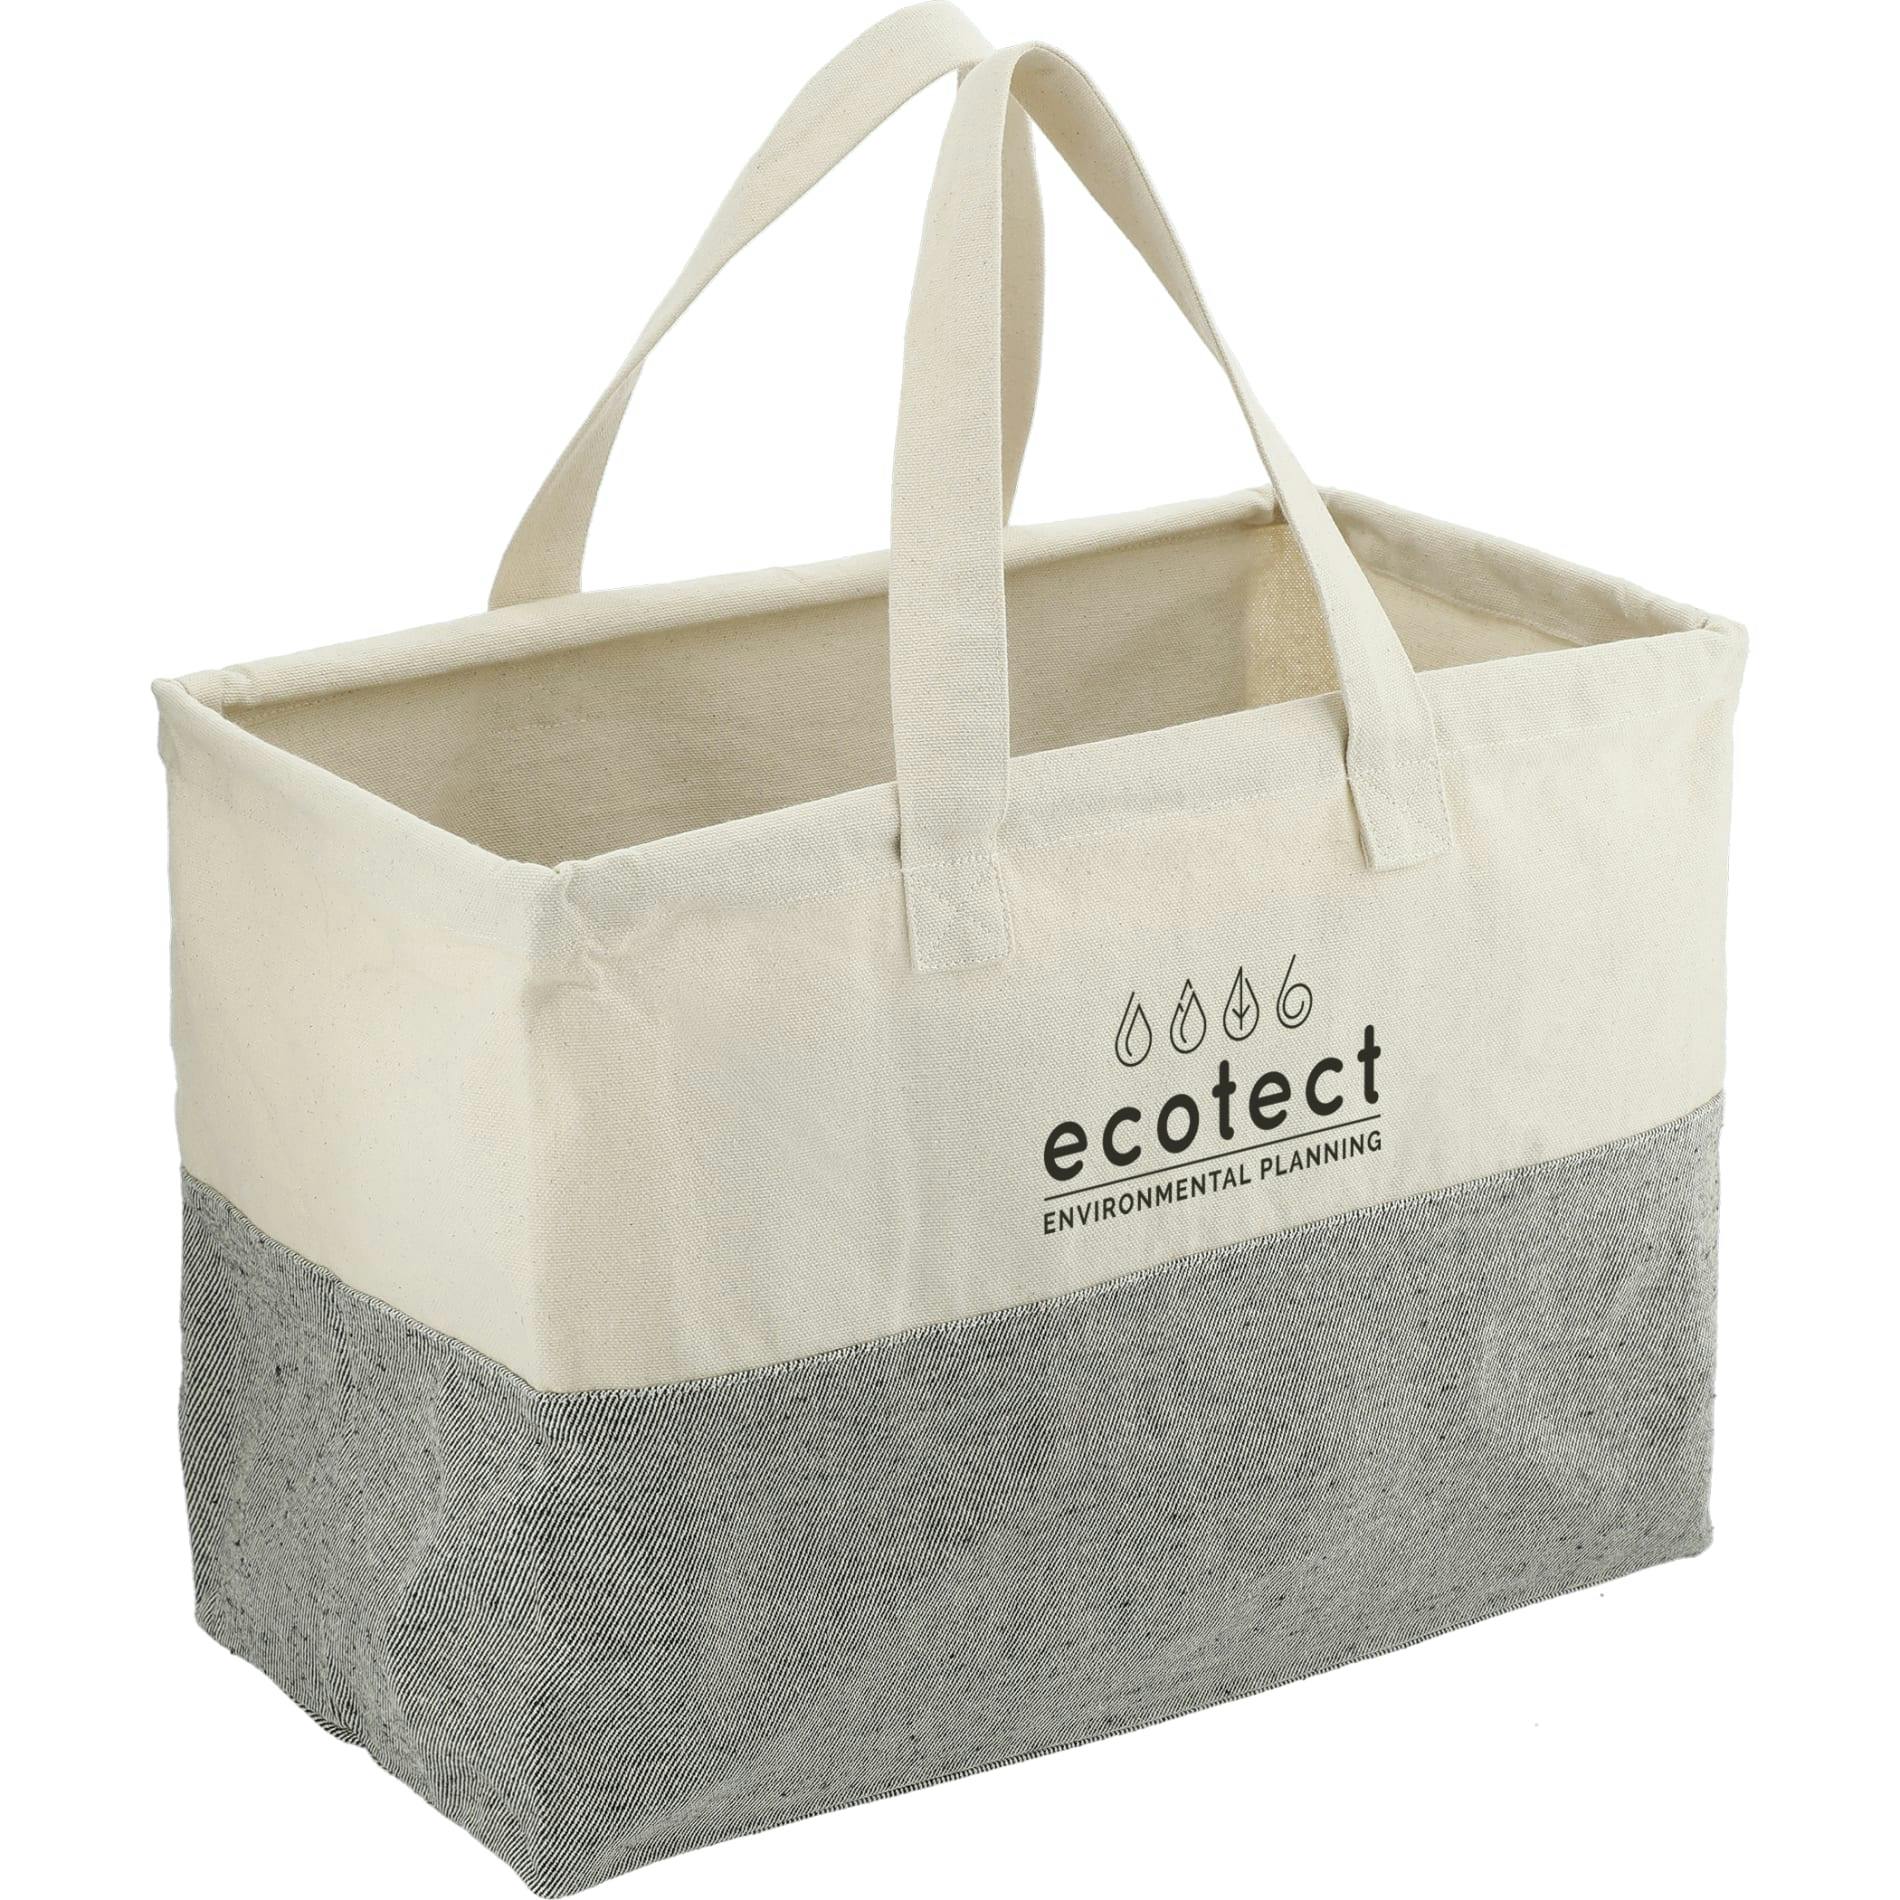 Recycled Cotton Utility Tote - additional Image 3